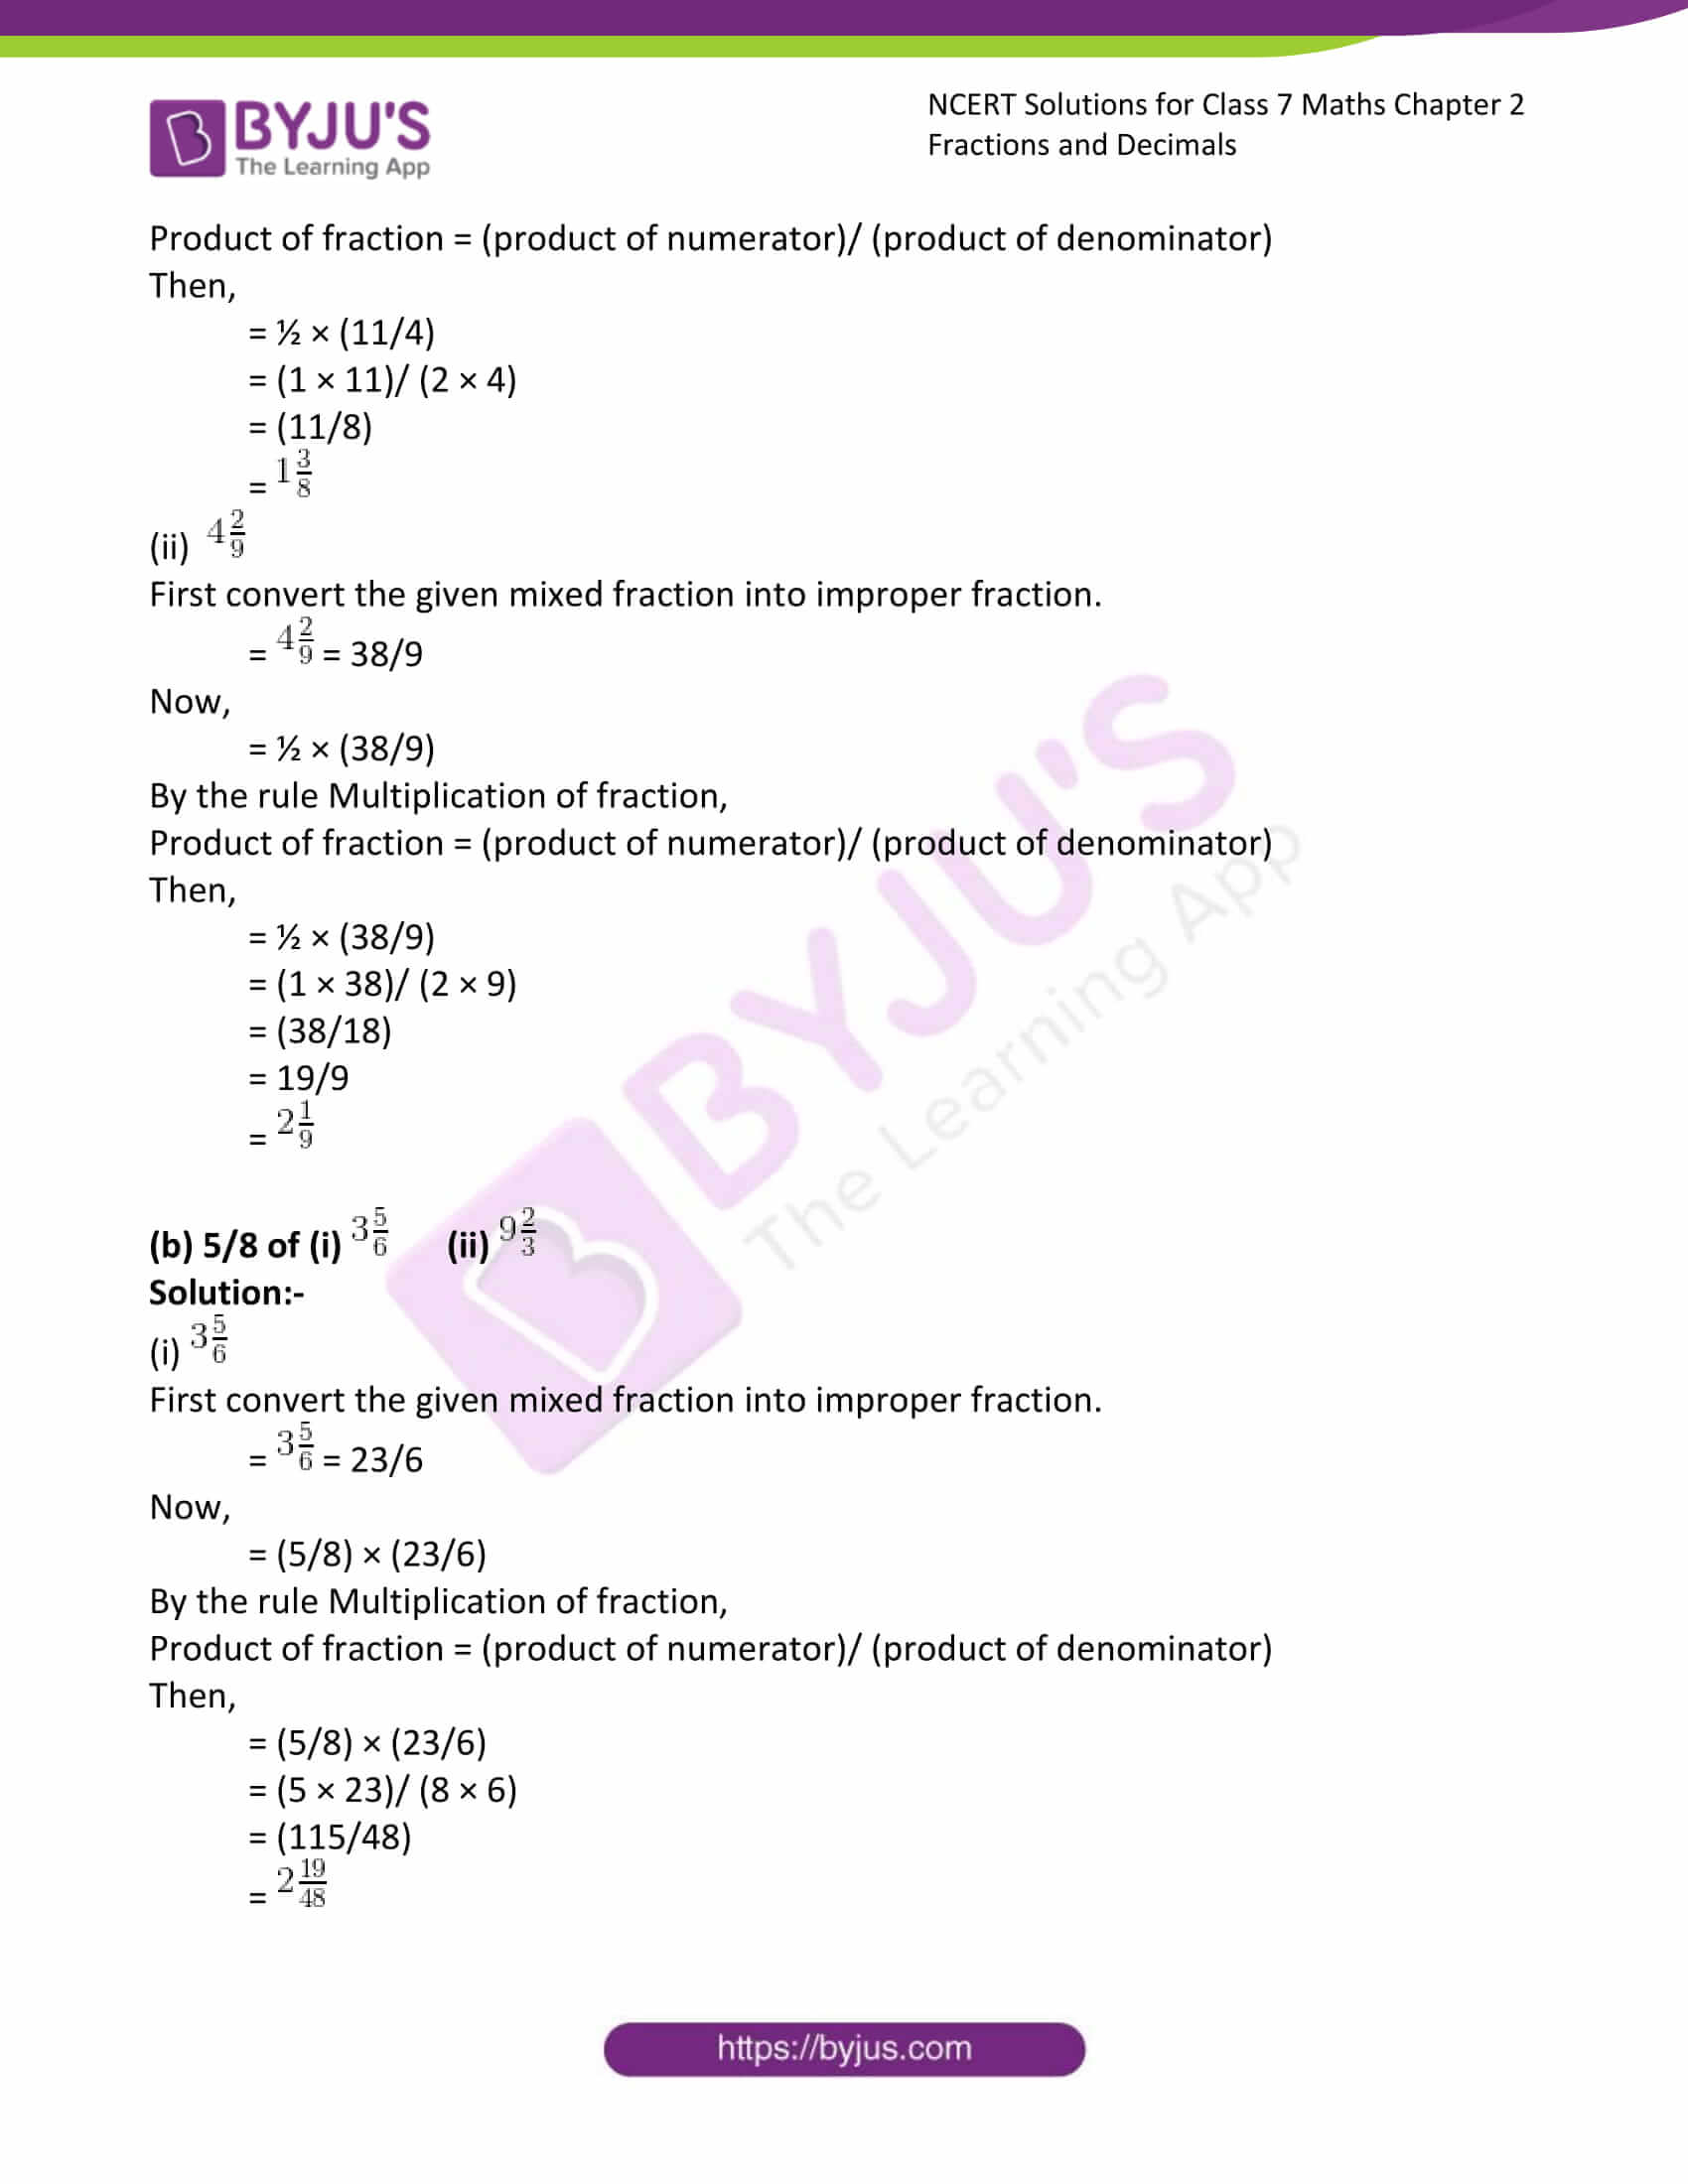 NCERT Solutions For Class 7 Maths Exercise 2 2 Chapter 2 Fractions And